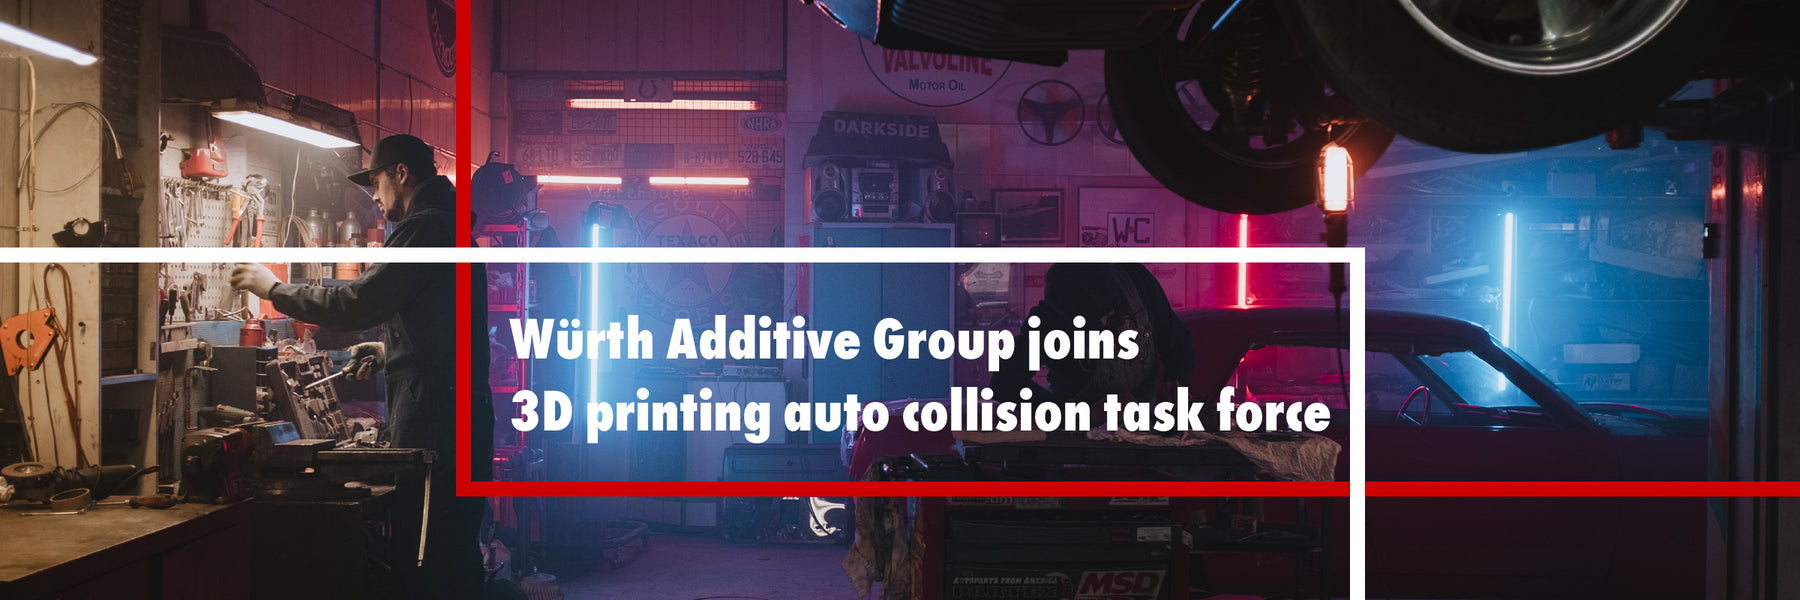 Würth Additive Group CEO, AJ Strandquist, joins 3D Printing in Auto Collision Task Force, announced at IBIS 2023